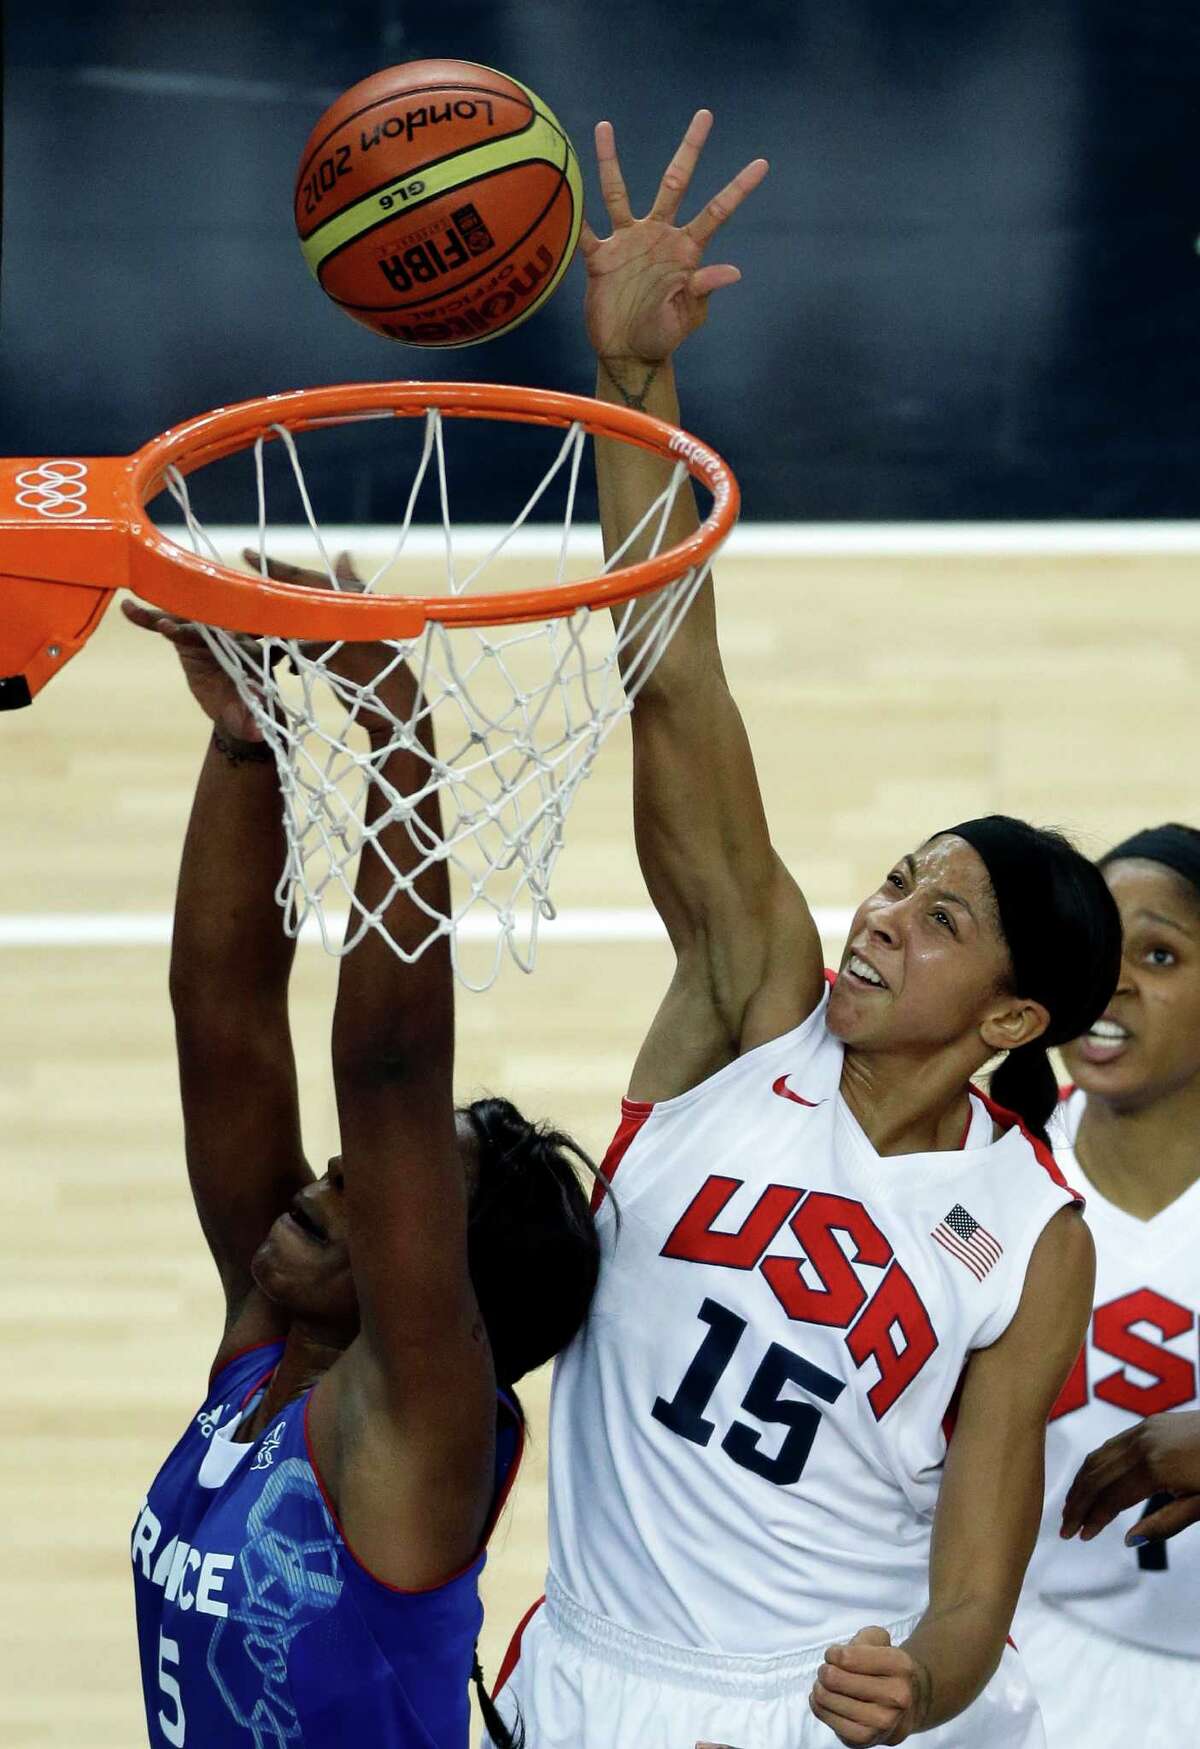 United States' Candace Parker (15) shoots for the basket past France's Endene Miyem during a women's gold medal basketball game at the 2012 Summer Olympics, Saturday, Aug. 11, 2012, in London. (AP Photo/Victor R. Caivano)